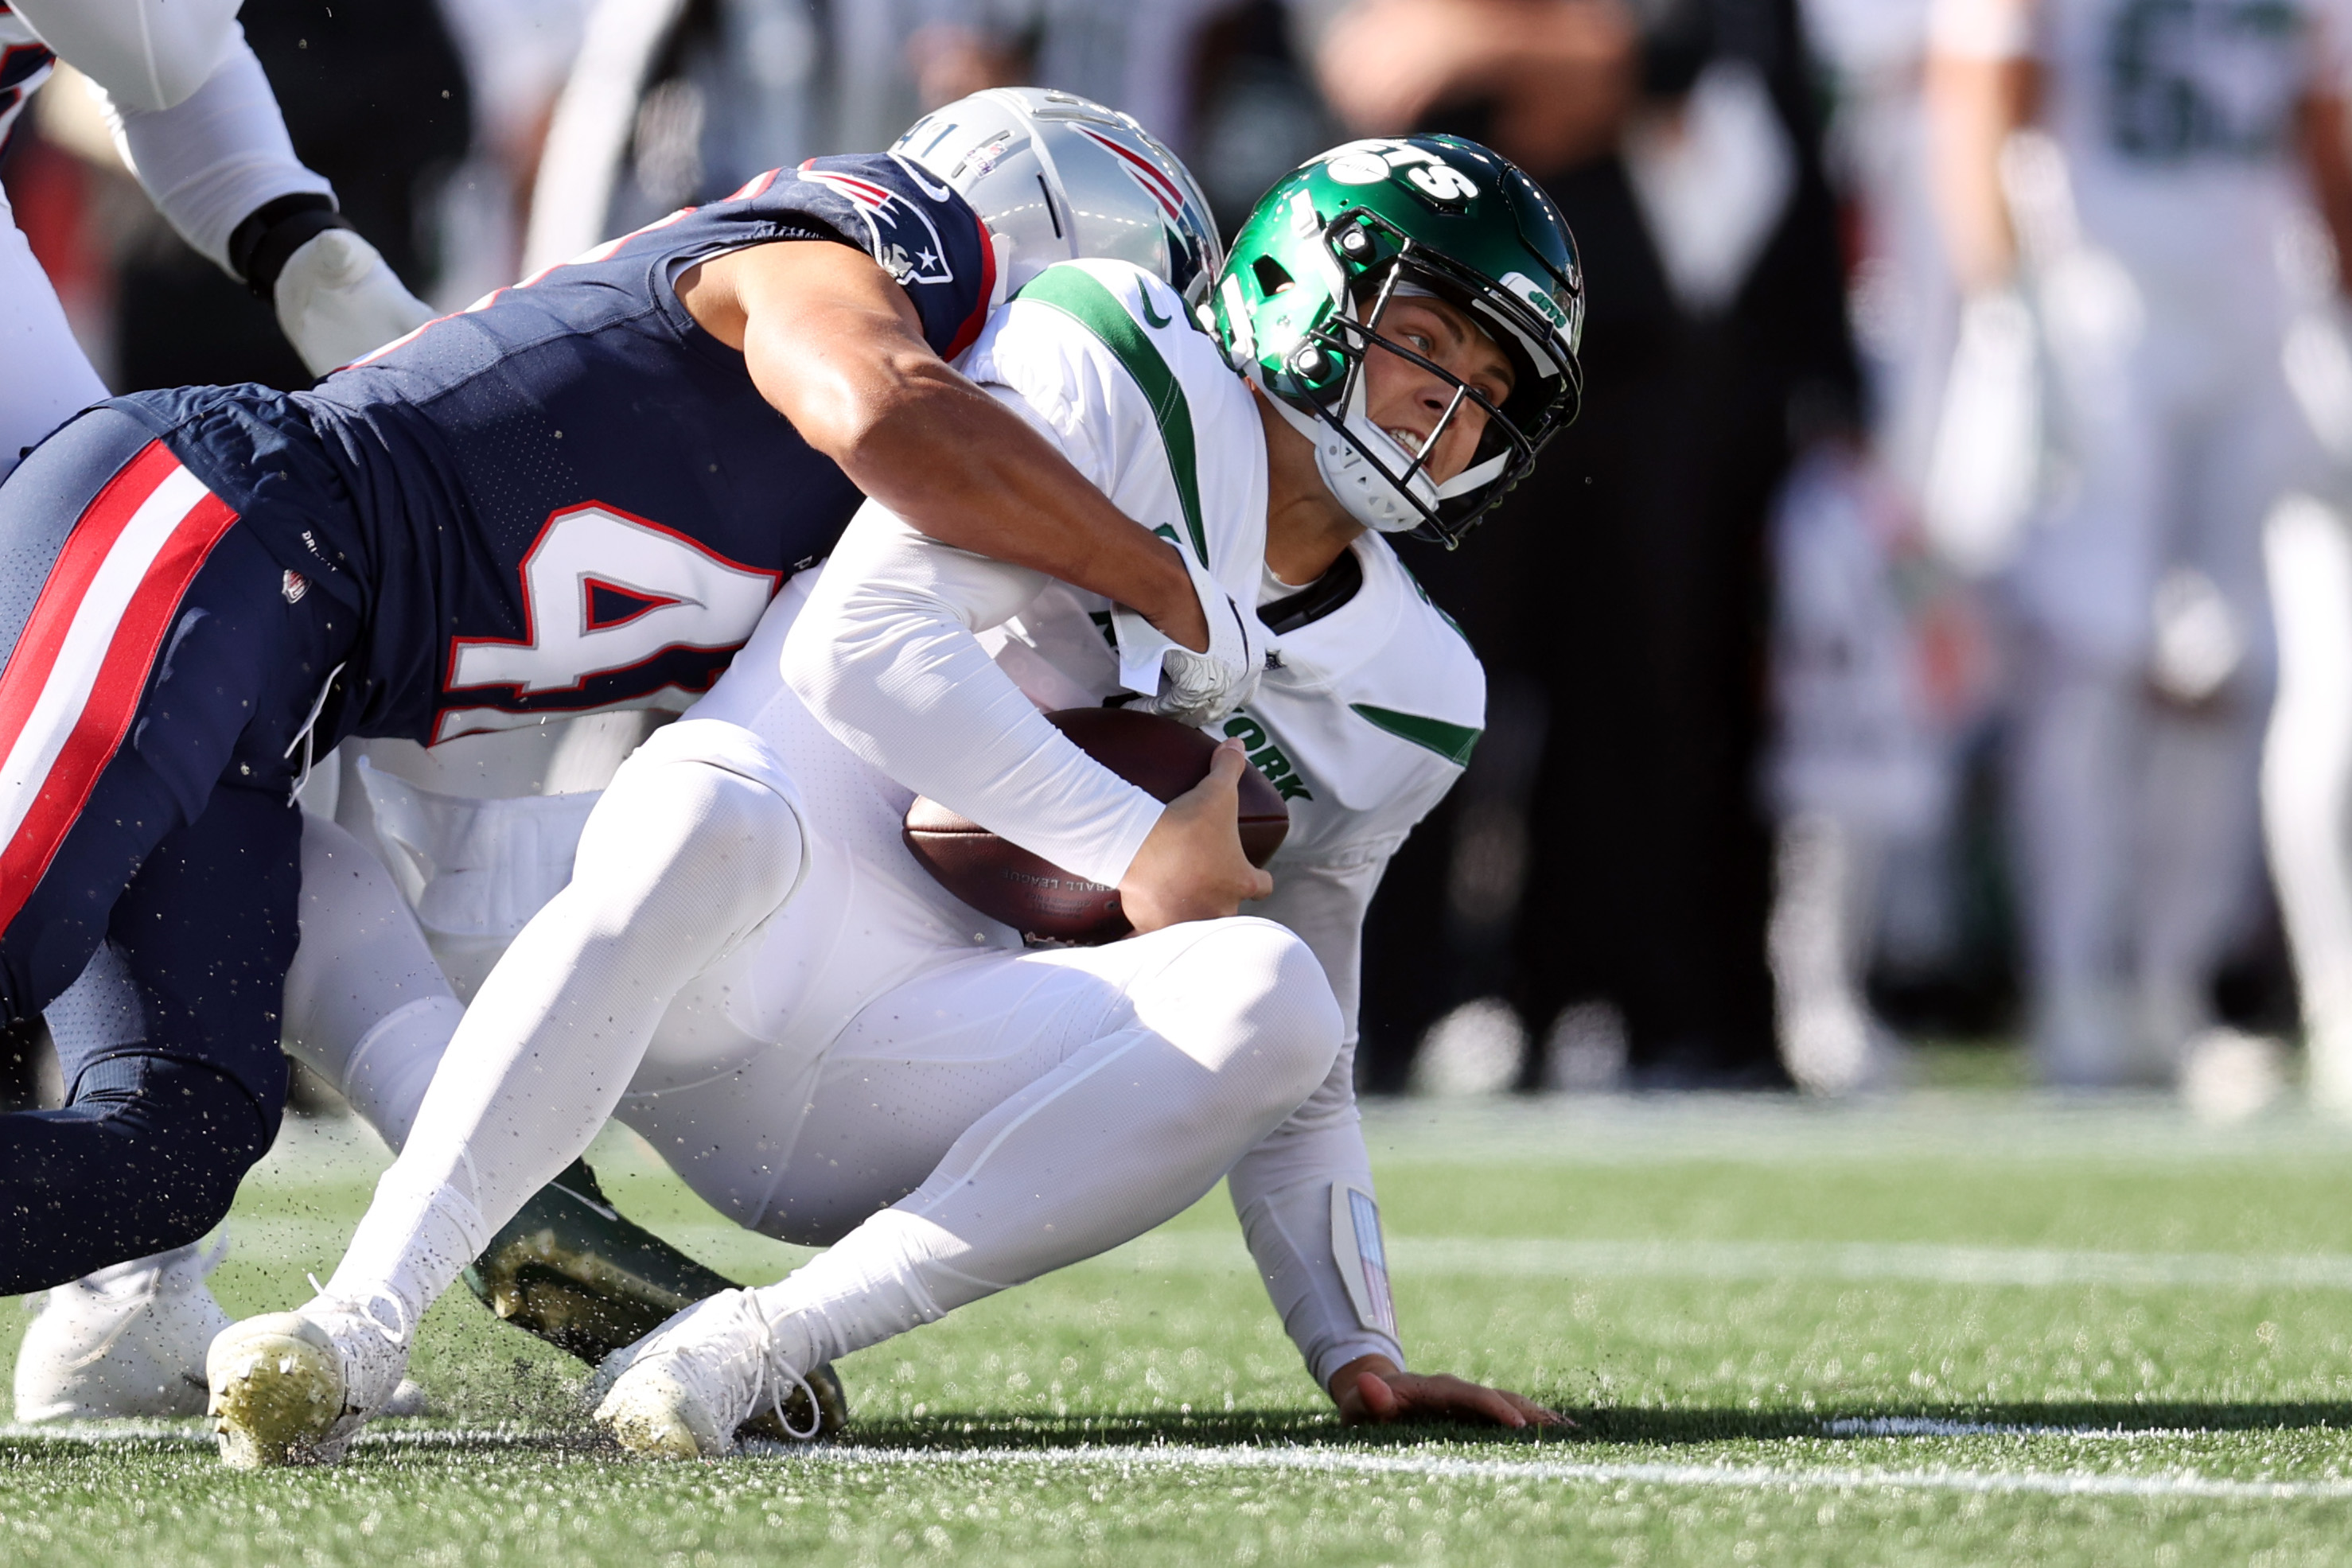 Myles Bryant of the New England Patriots sacks Zach Wilson of the New York Jets at Gillette Stadium on October 24, 2021, in Foxborough, Massachusetts.